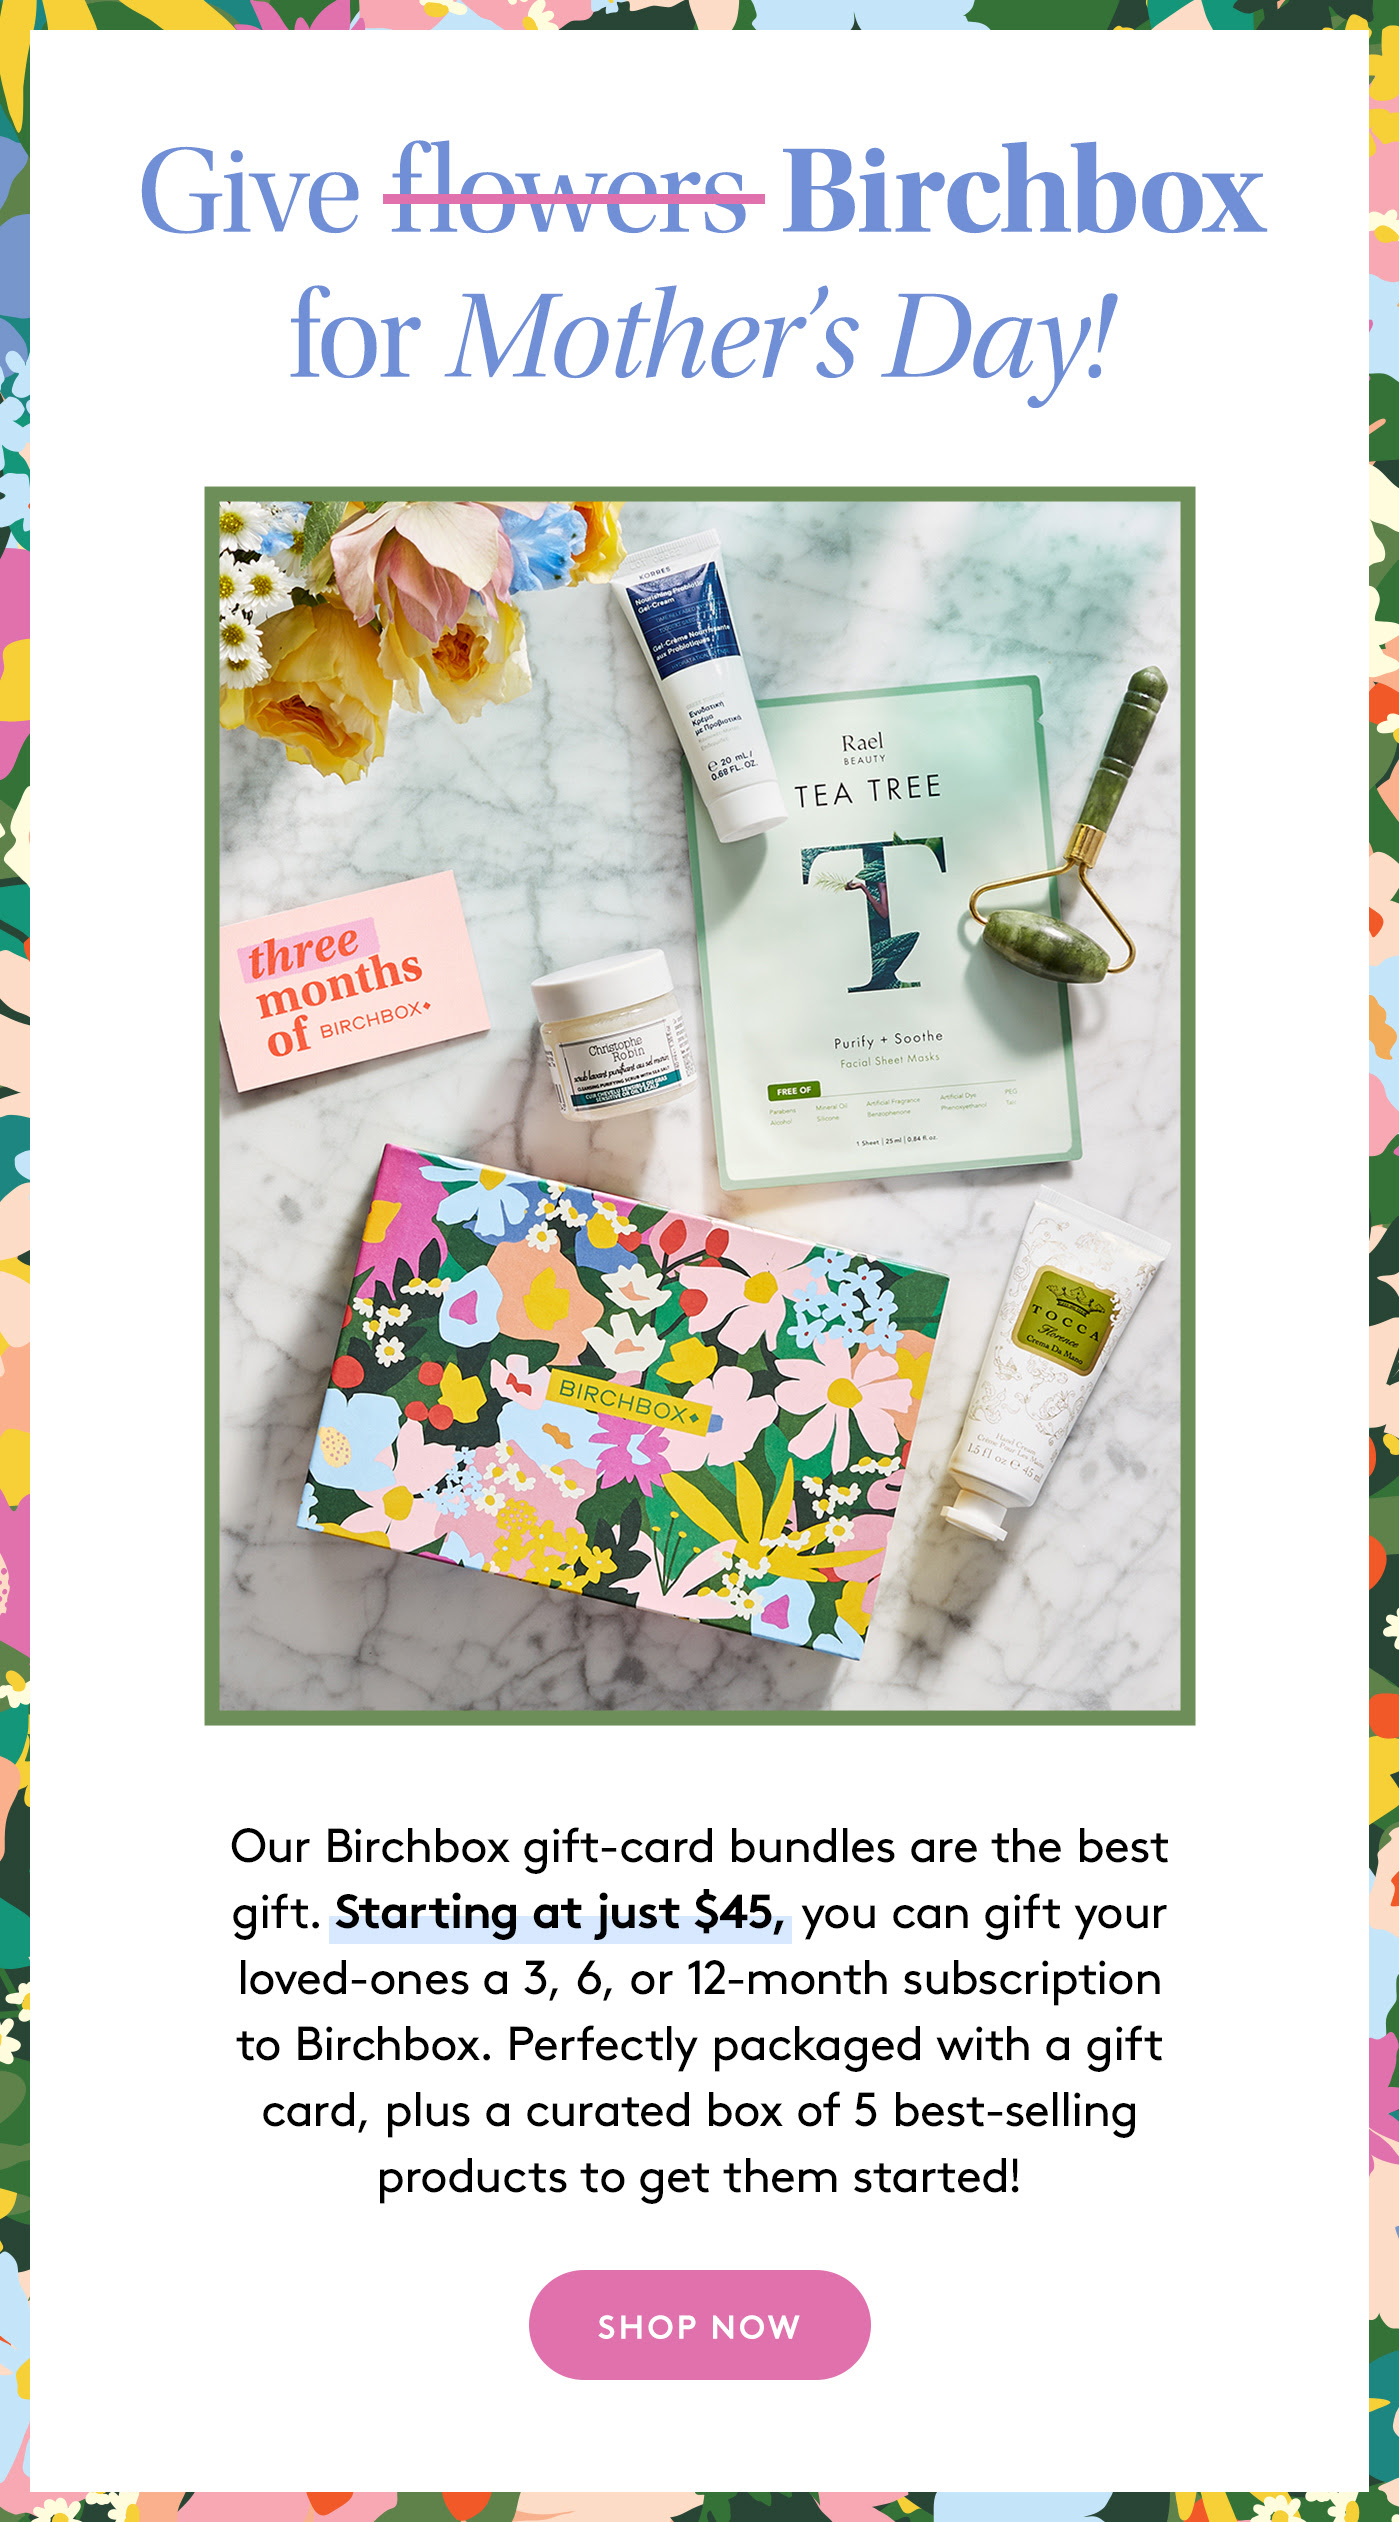 Birchbox Mother’s Day Gift Subscription Bundles Available Now